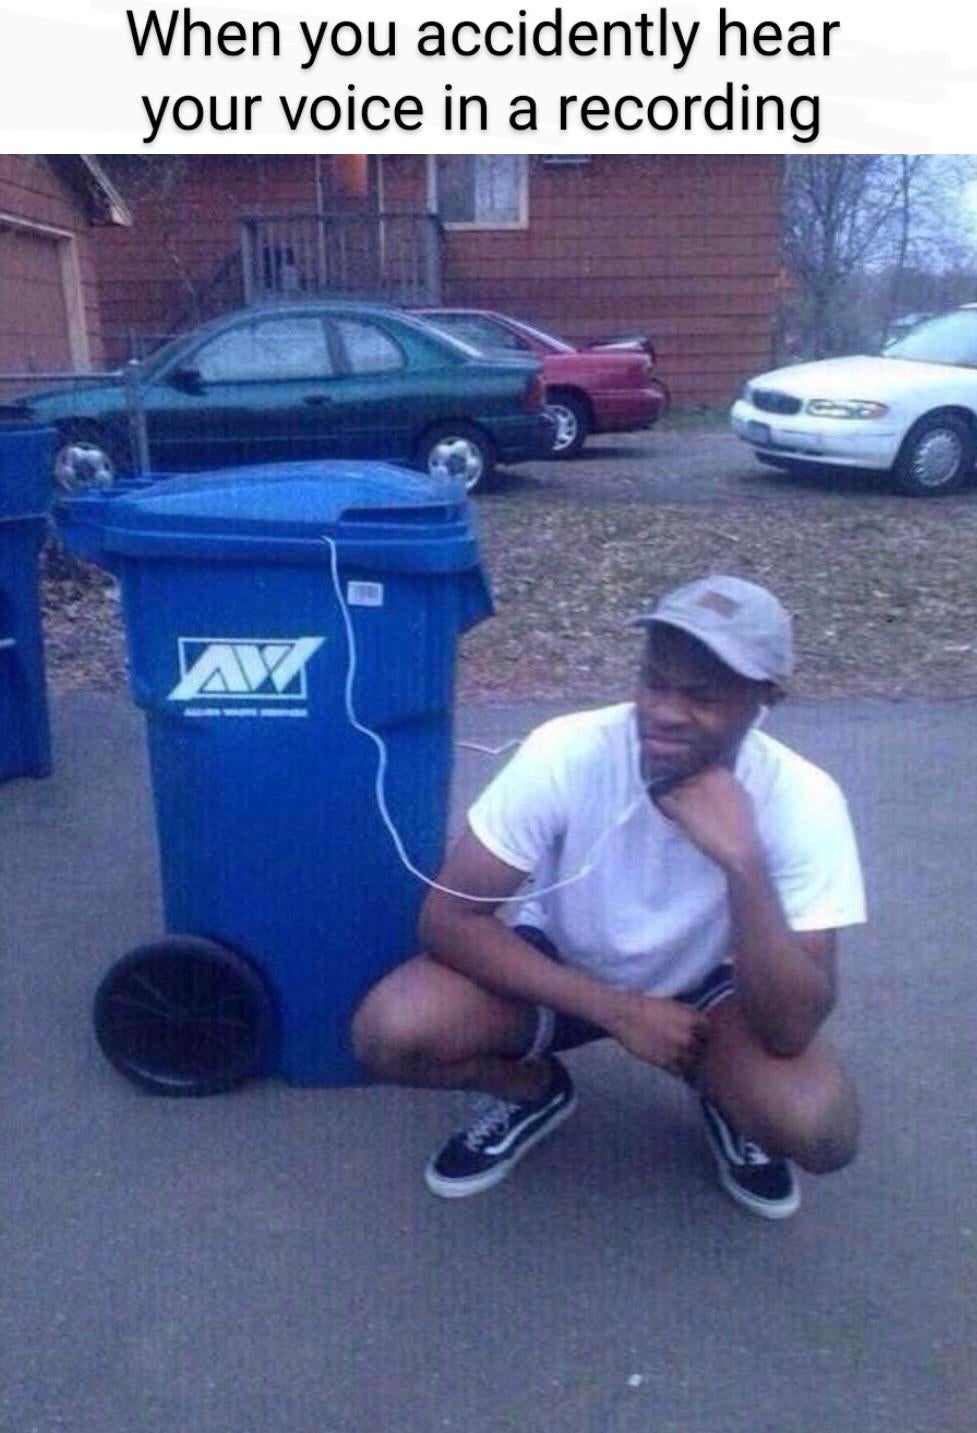 listening to trash can meme - When you accidently hear your voice in a recording A